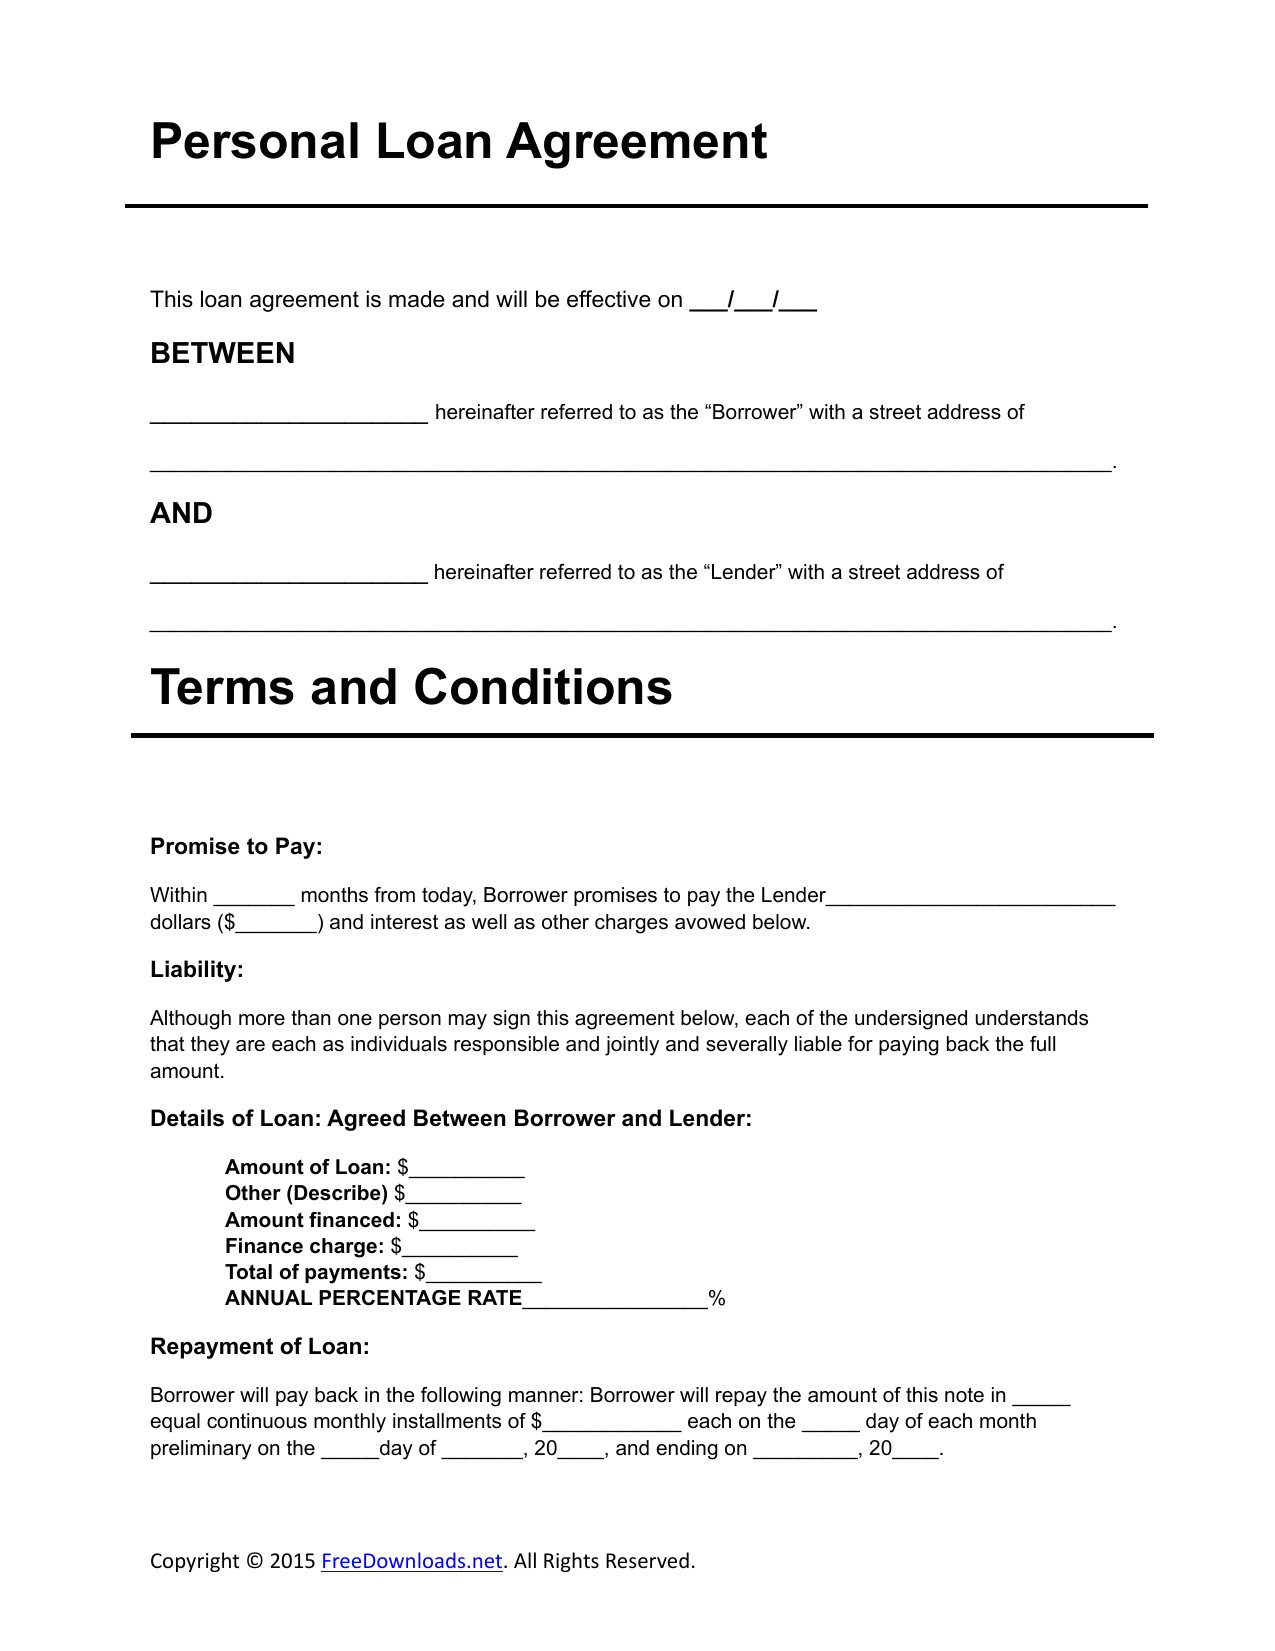 personal loan agreement template